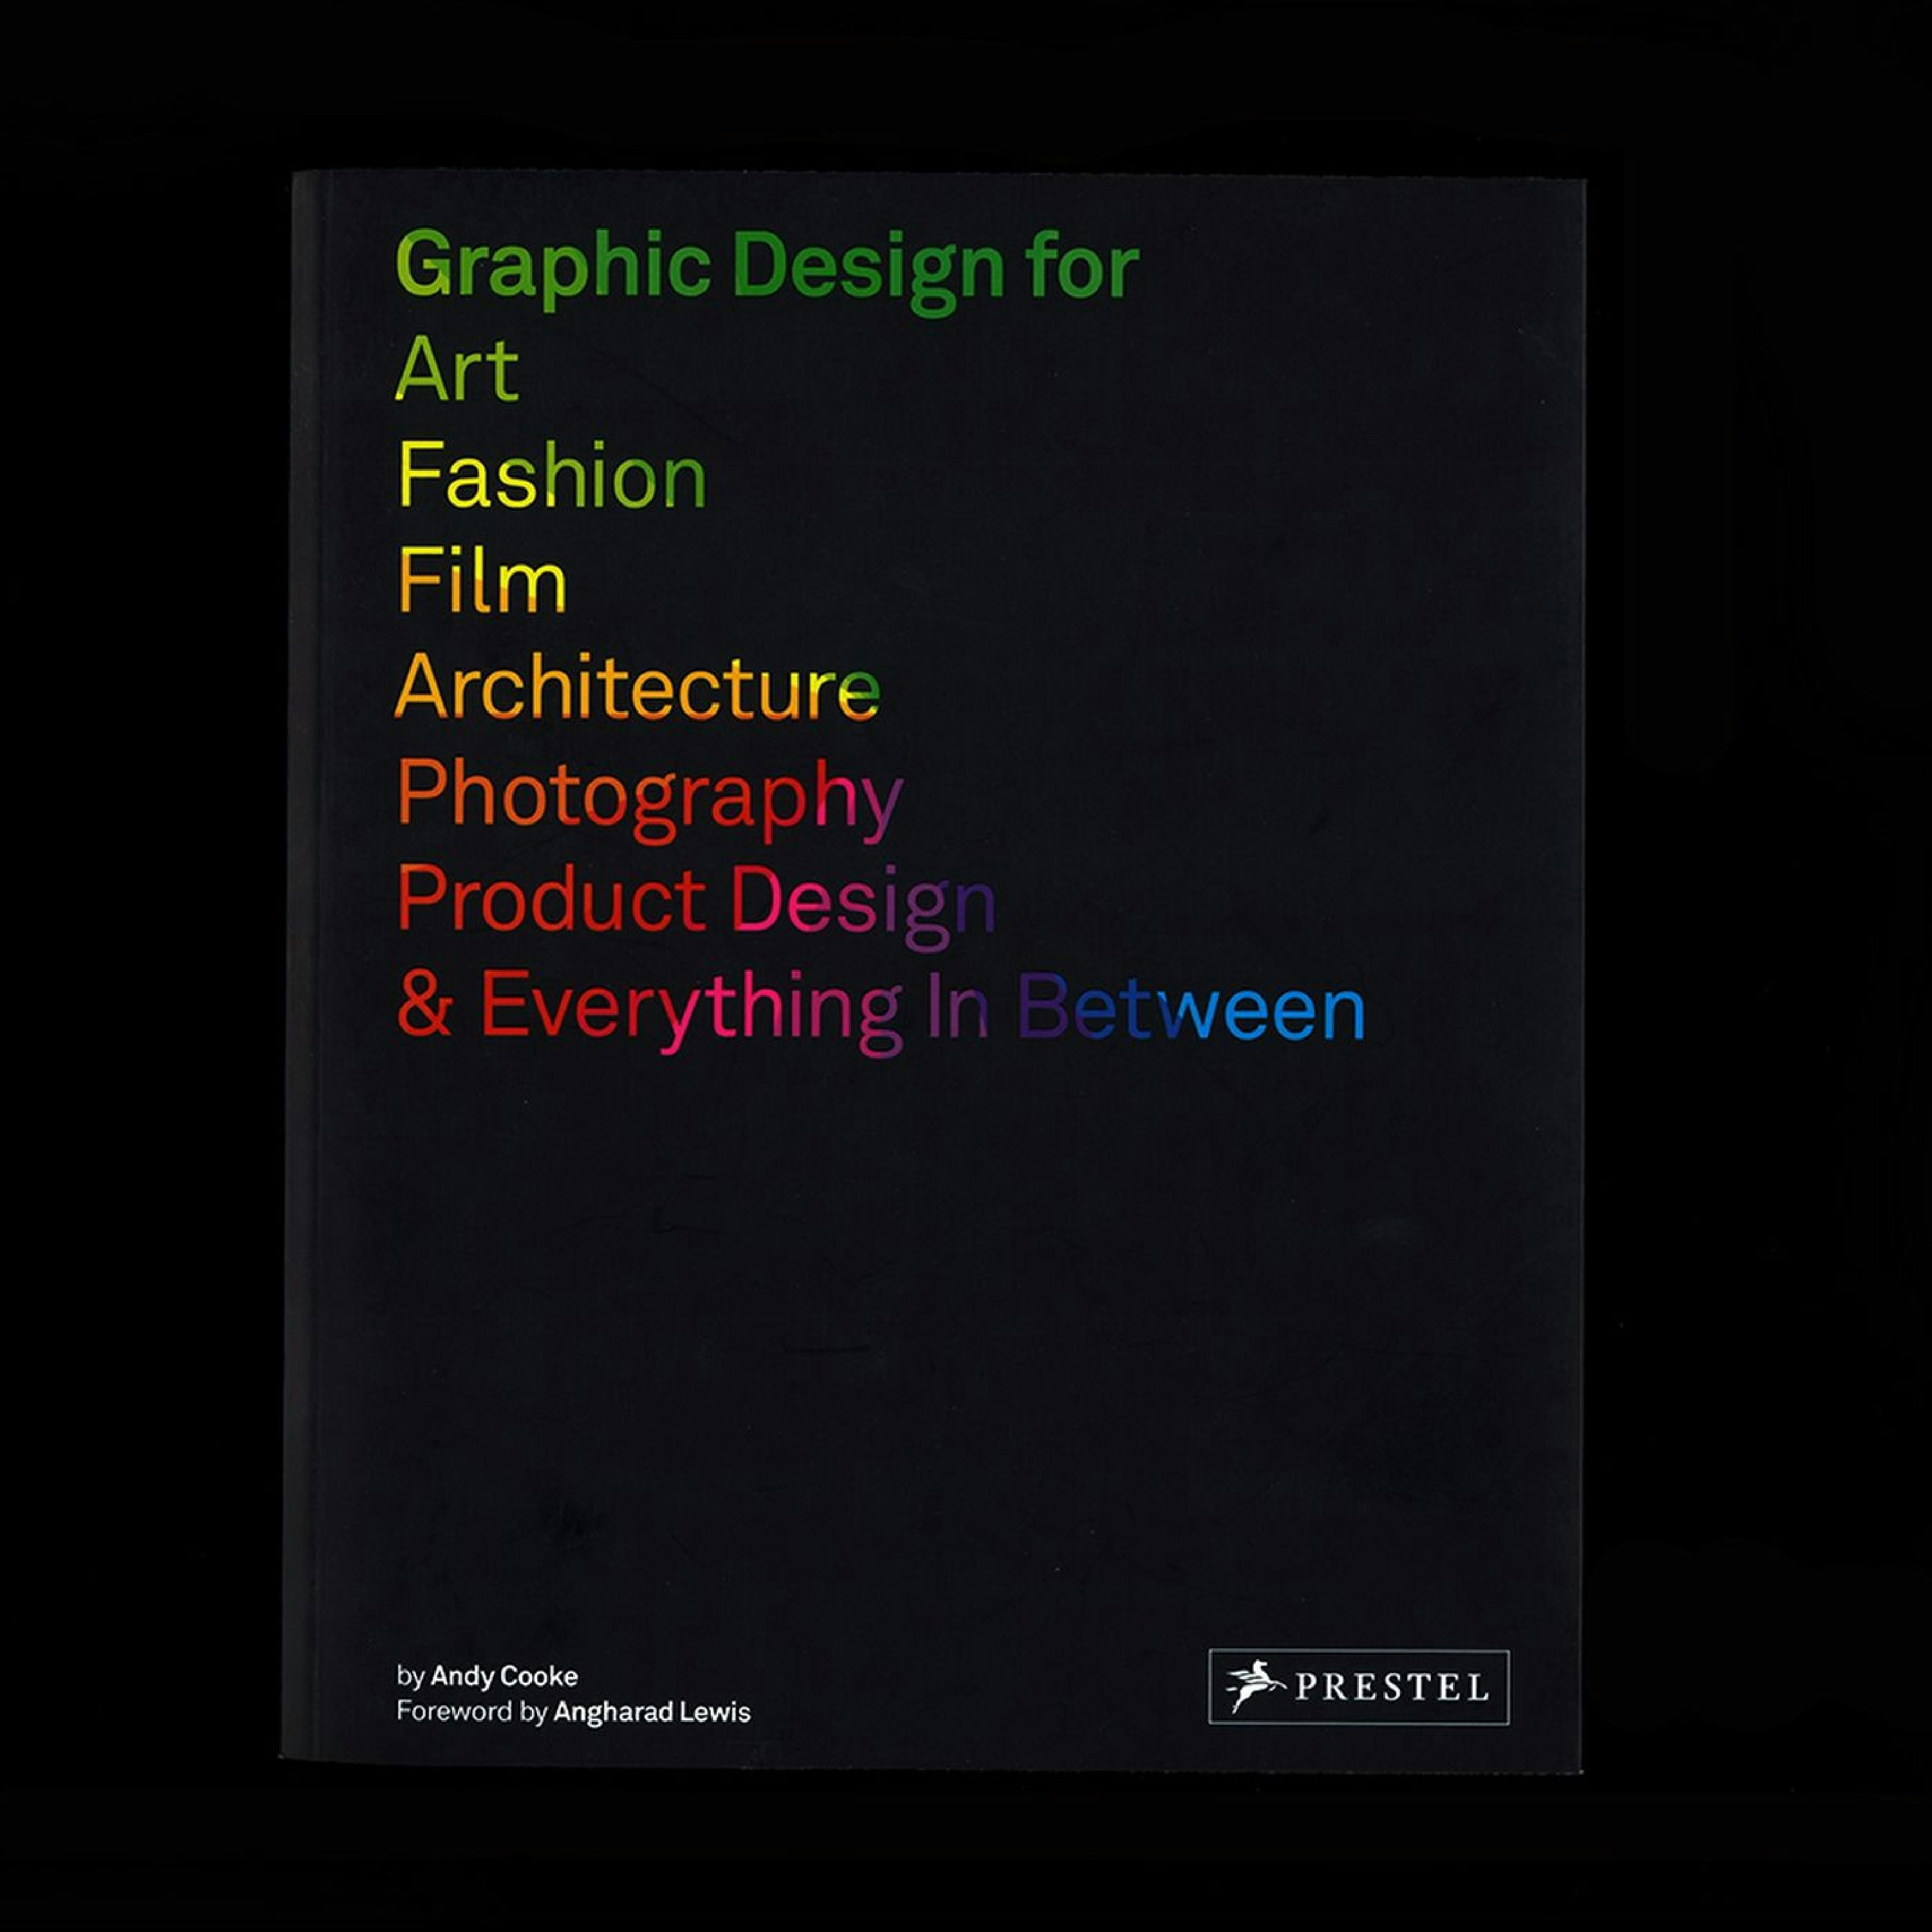 The front cover of 'Graphic Design for', a book by Andy Cooke